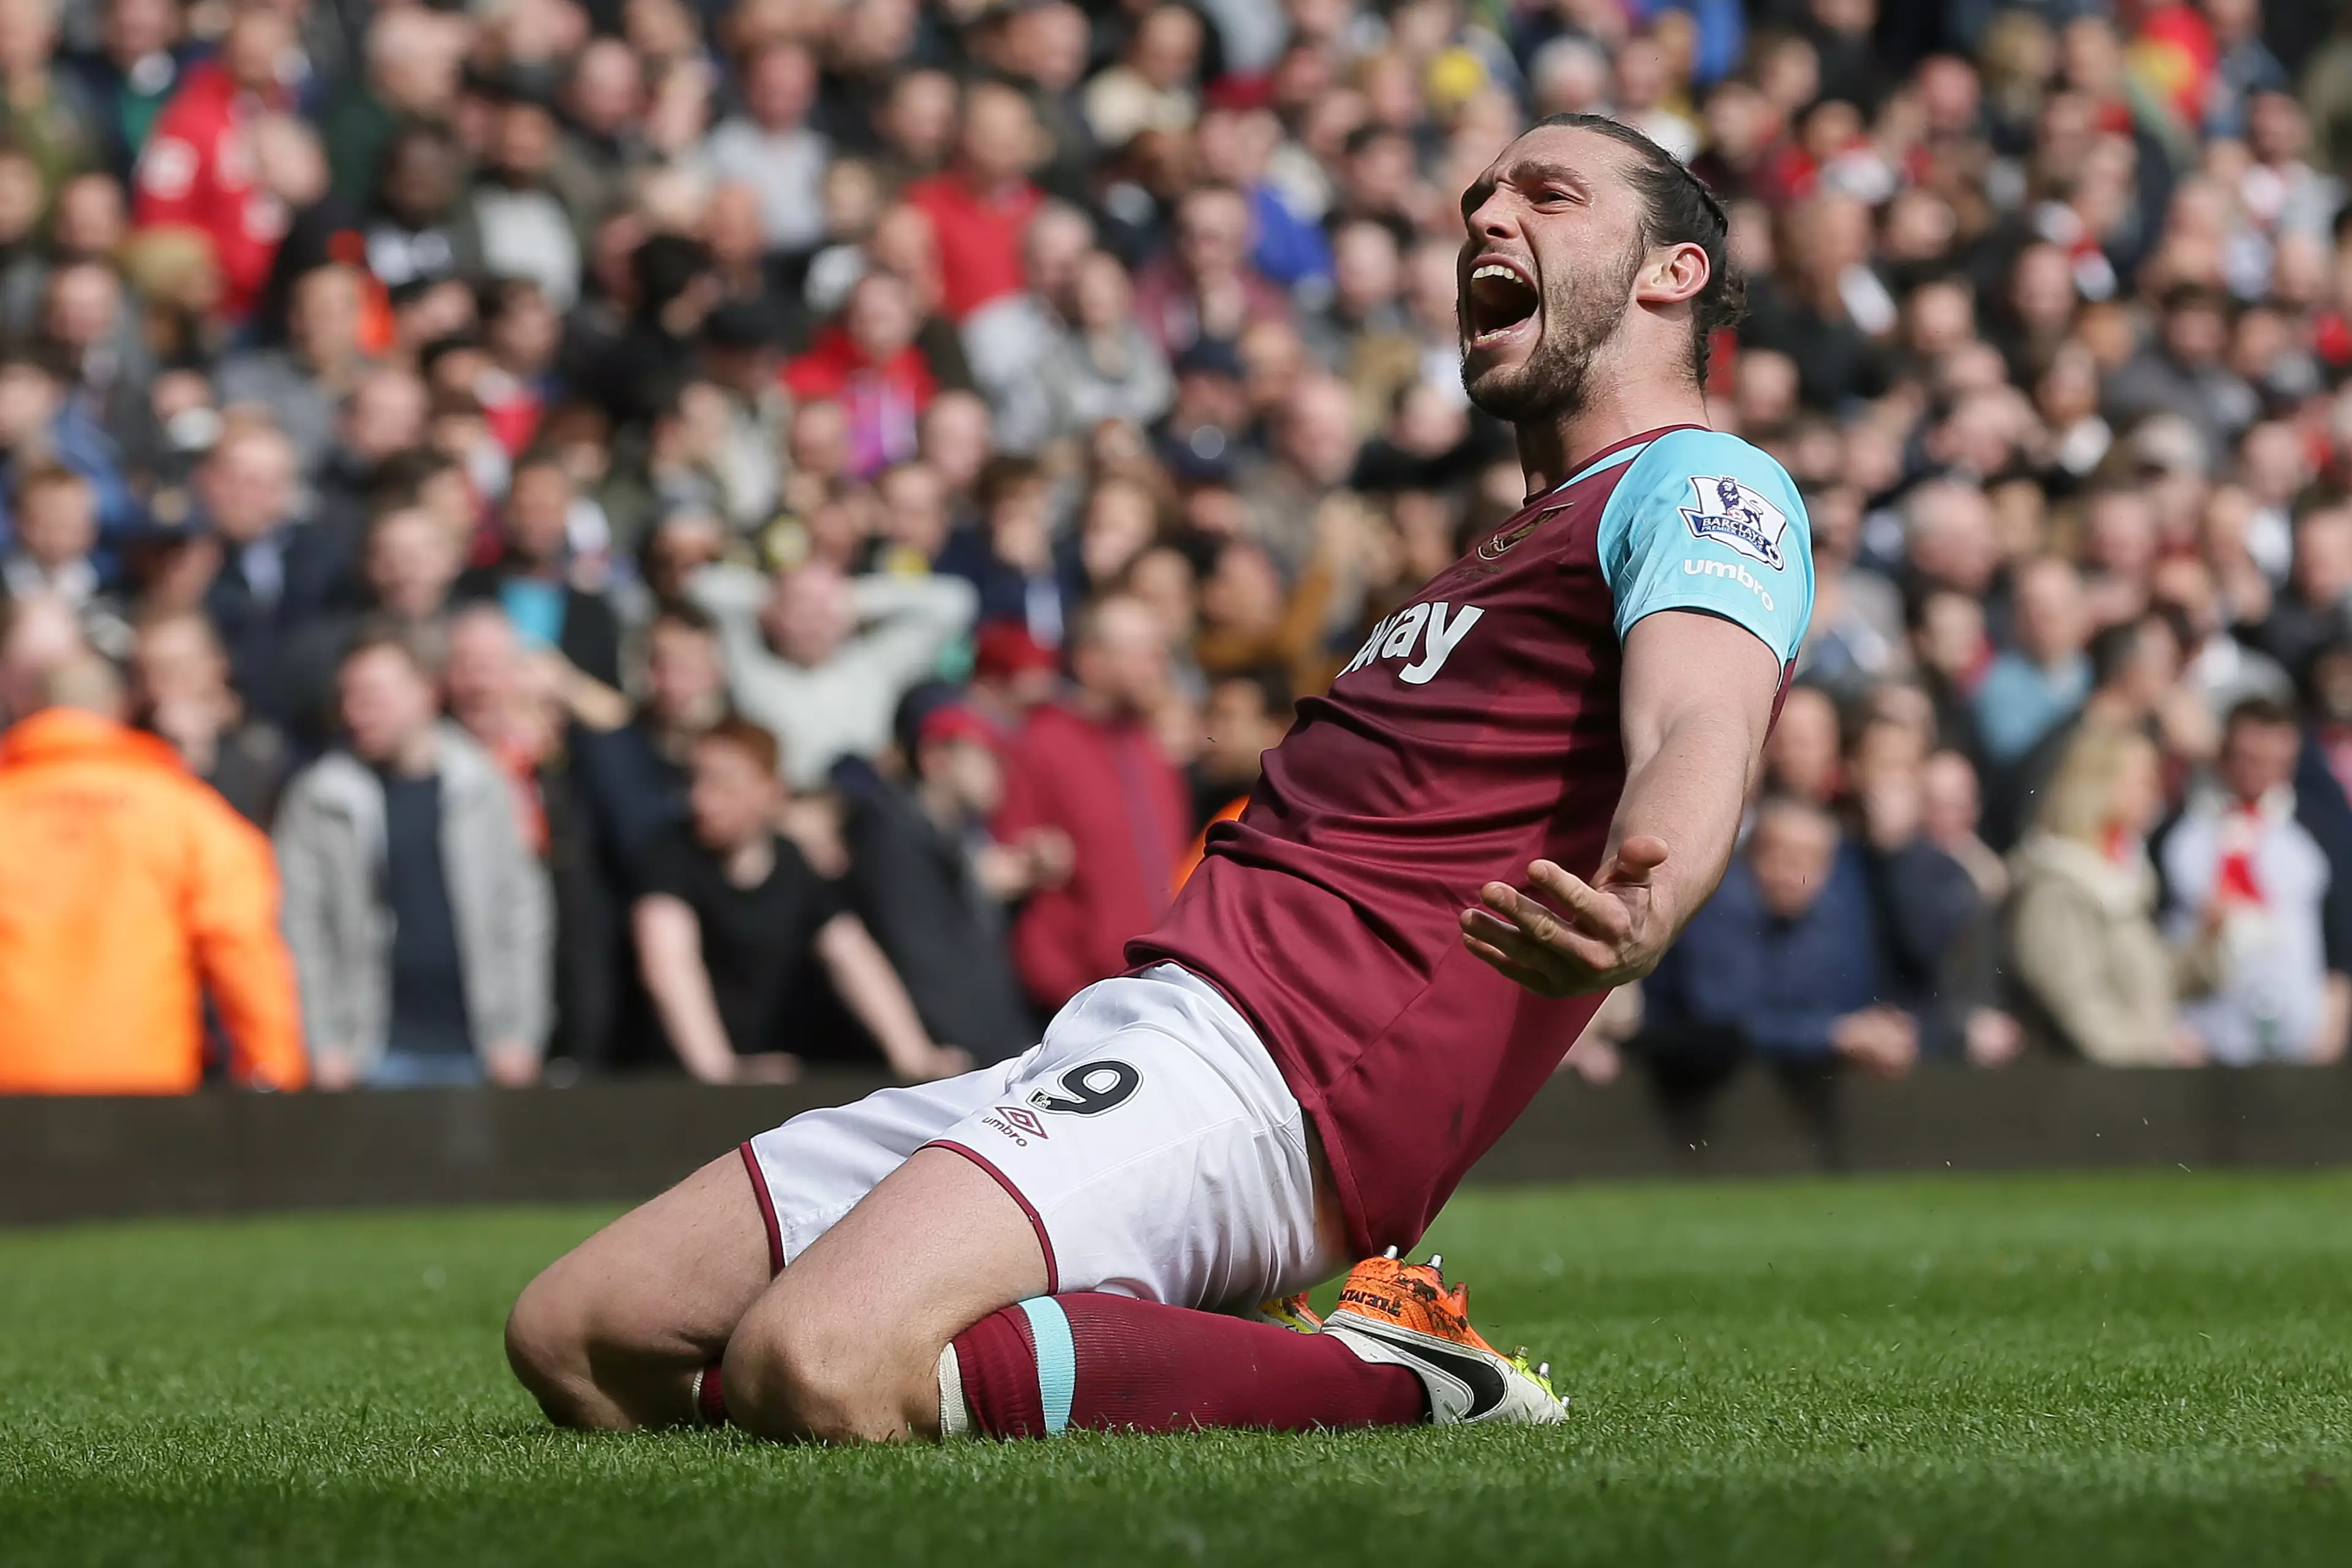 There hasn't been enough of this at West Ham for Carroll. Image: PA Images